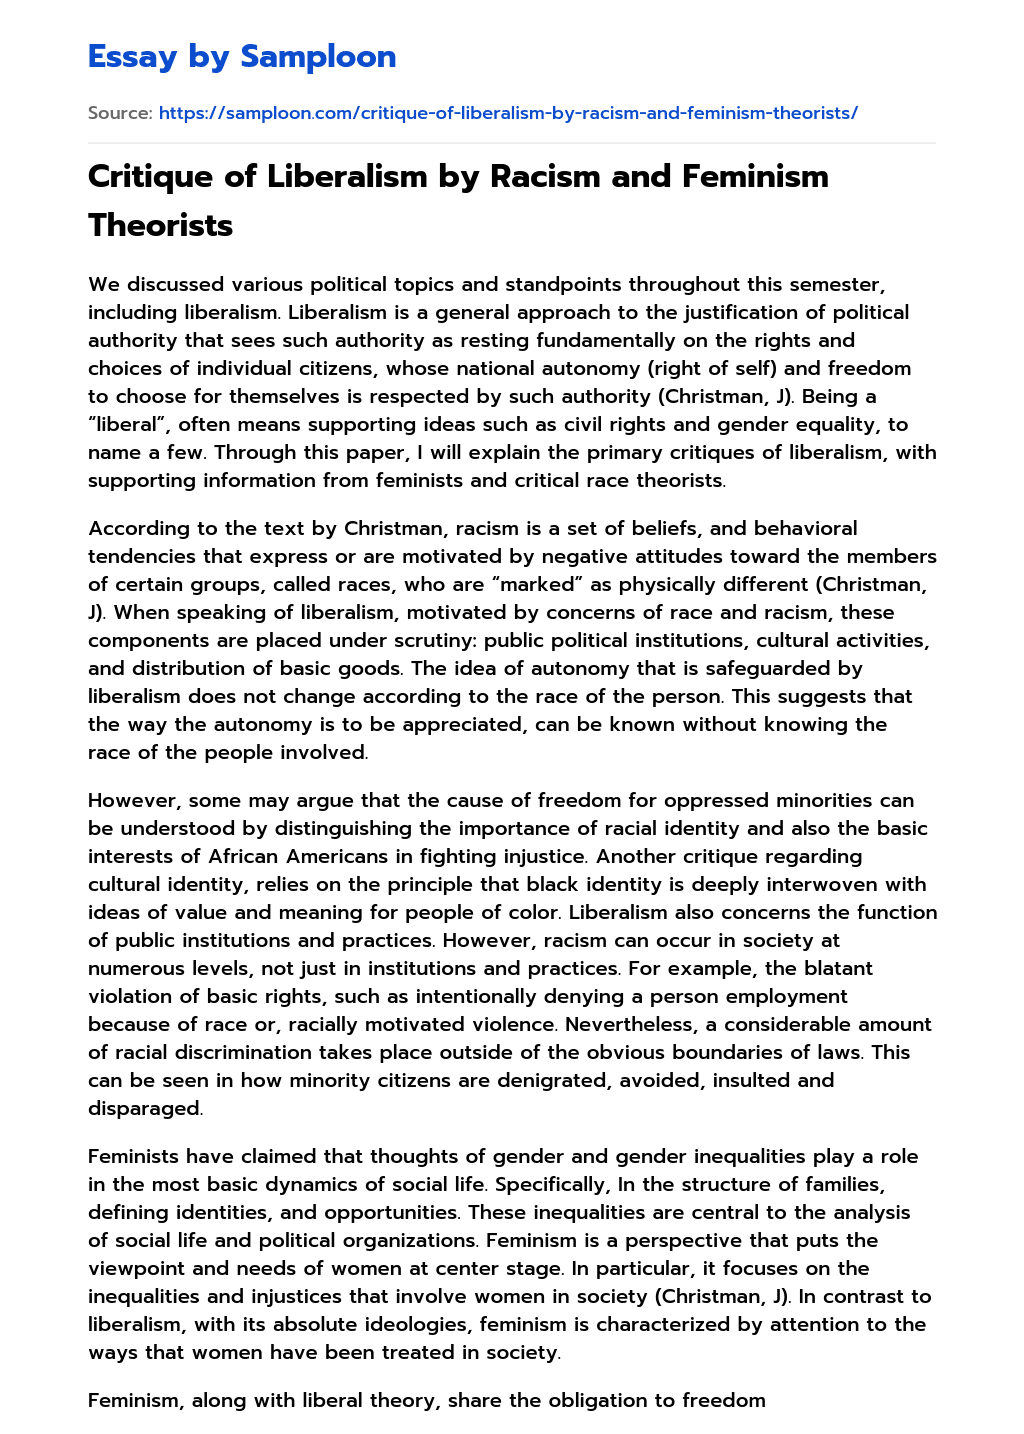 Critique of Liberalism by Racism and Feminism Theorists essay